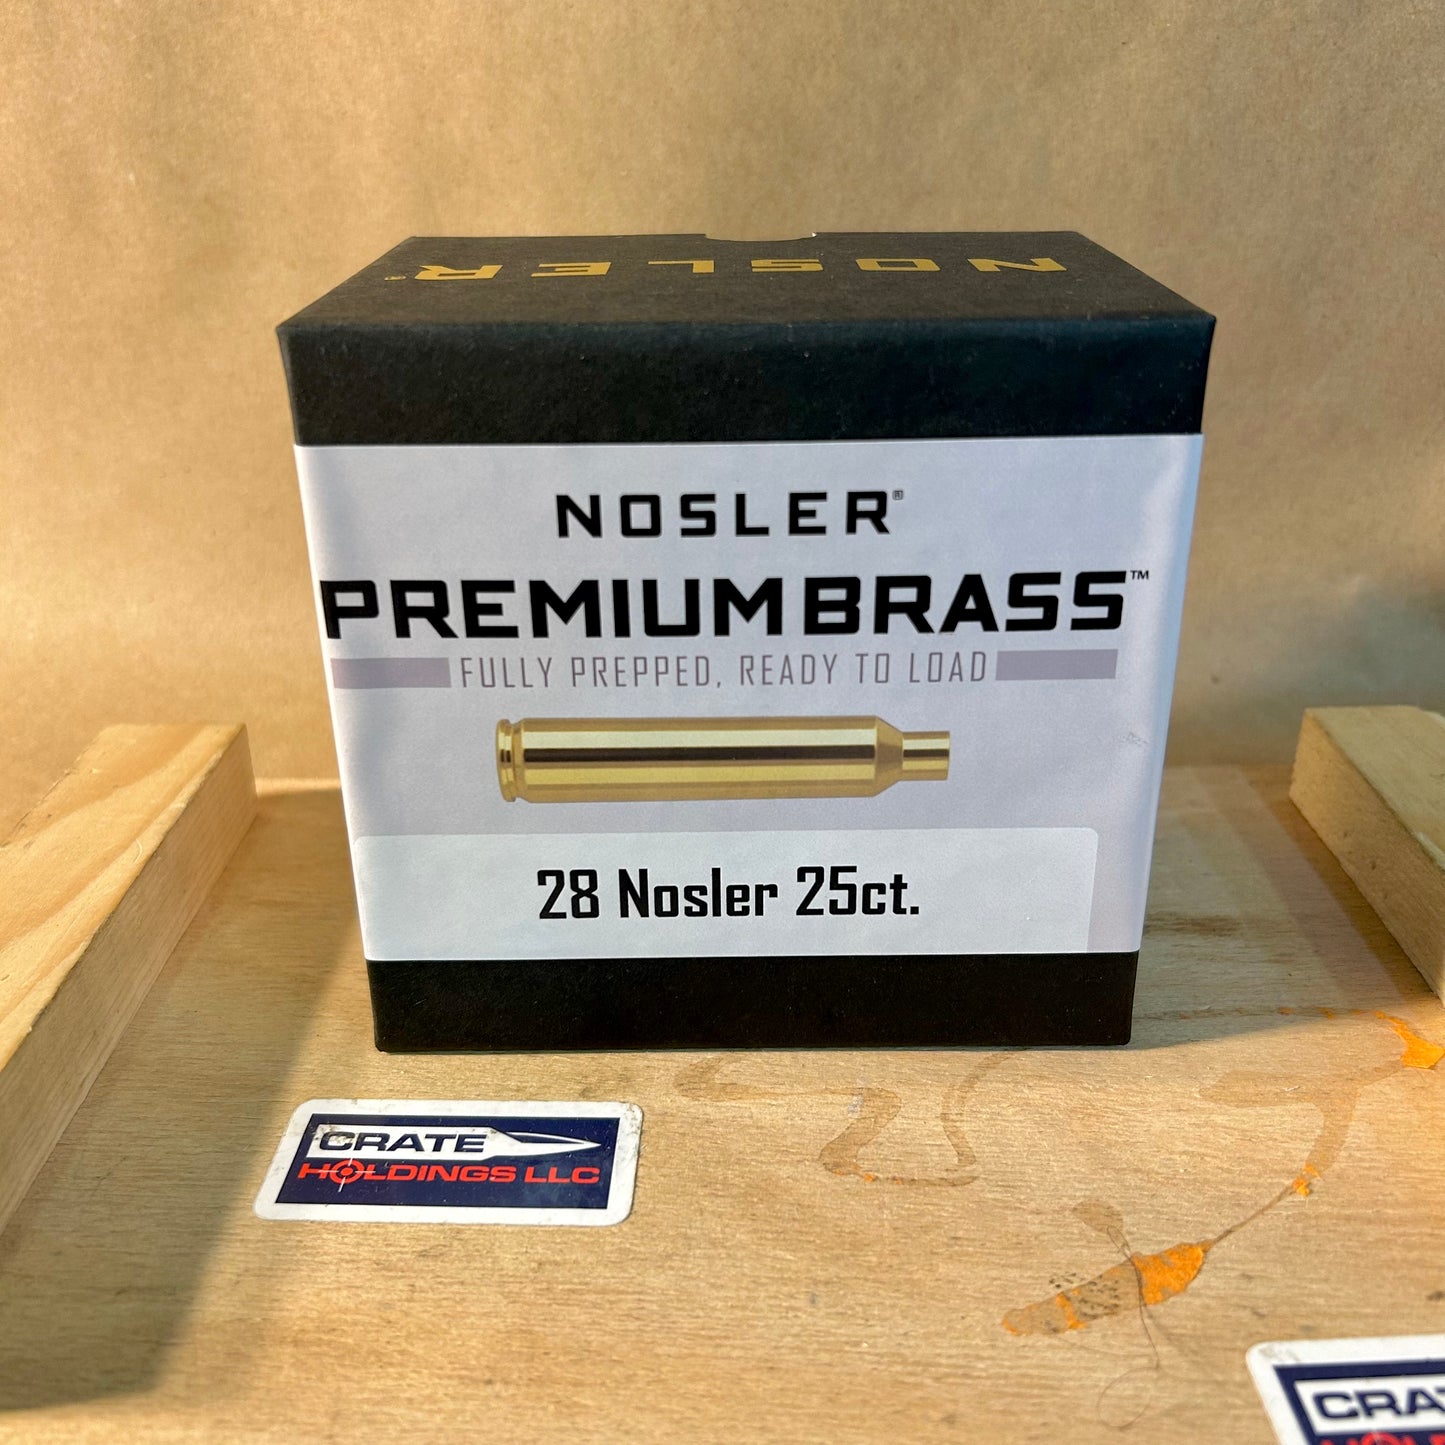 25 Count Box NEW Nosler .28 Nosler Brass Casings - Prepped & Ready to Load